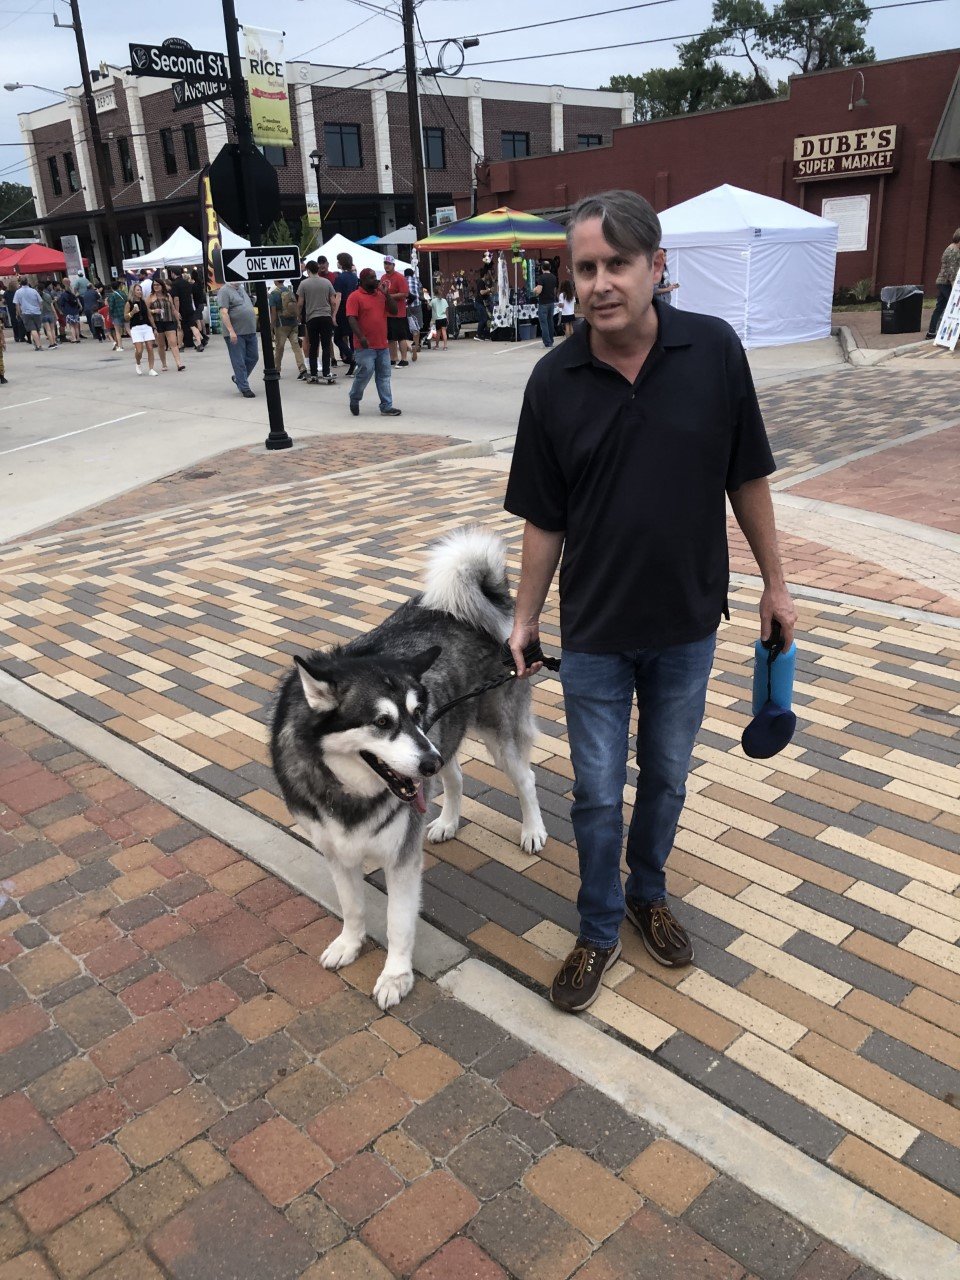 Jones Long and his dog Oscar, a husky, drew some attention at the Katy Rice Festival. Oscar was not the only dog at the festival, but he might have been the biggest.